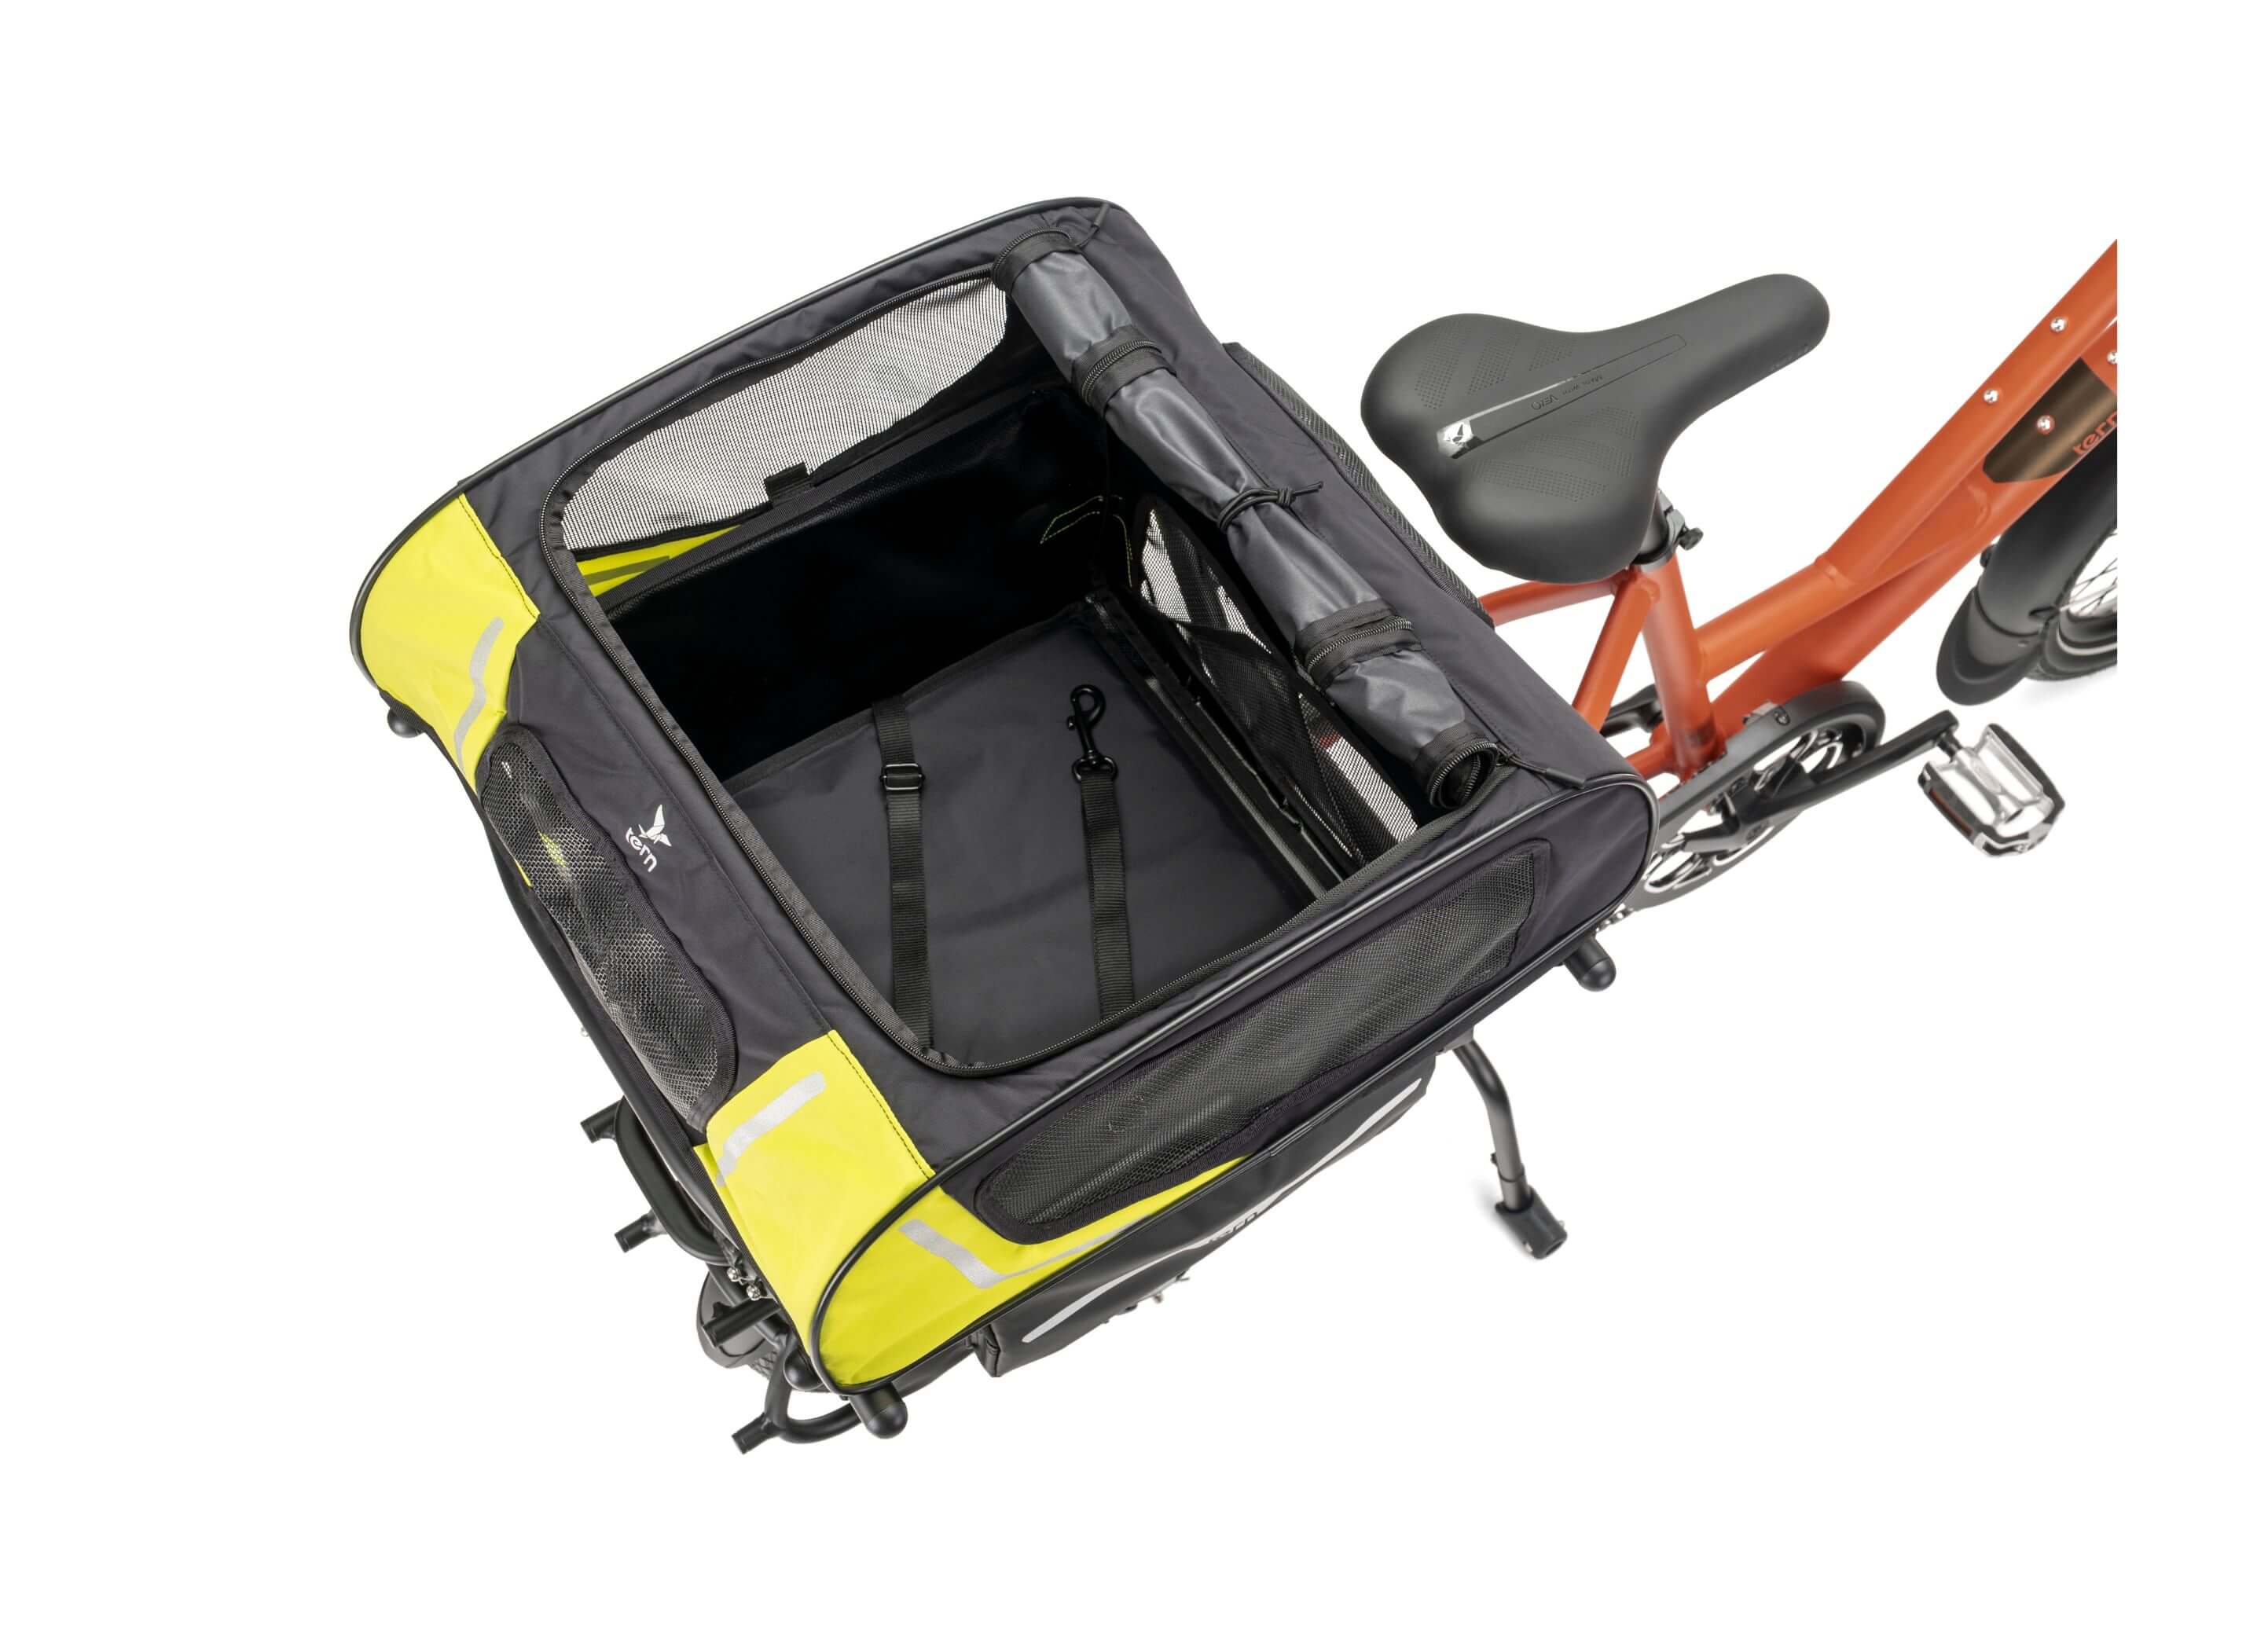 Tern Dog Roof Mini Bicycle Carrier